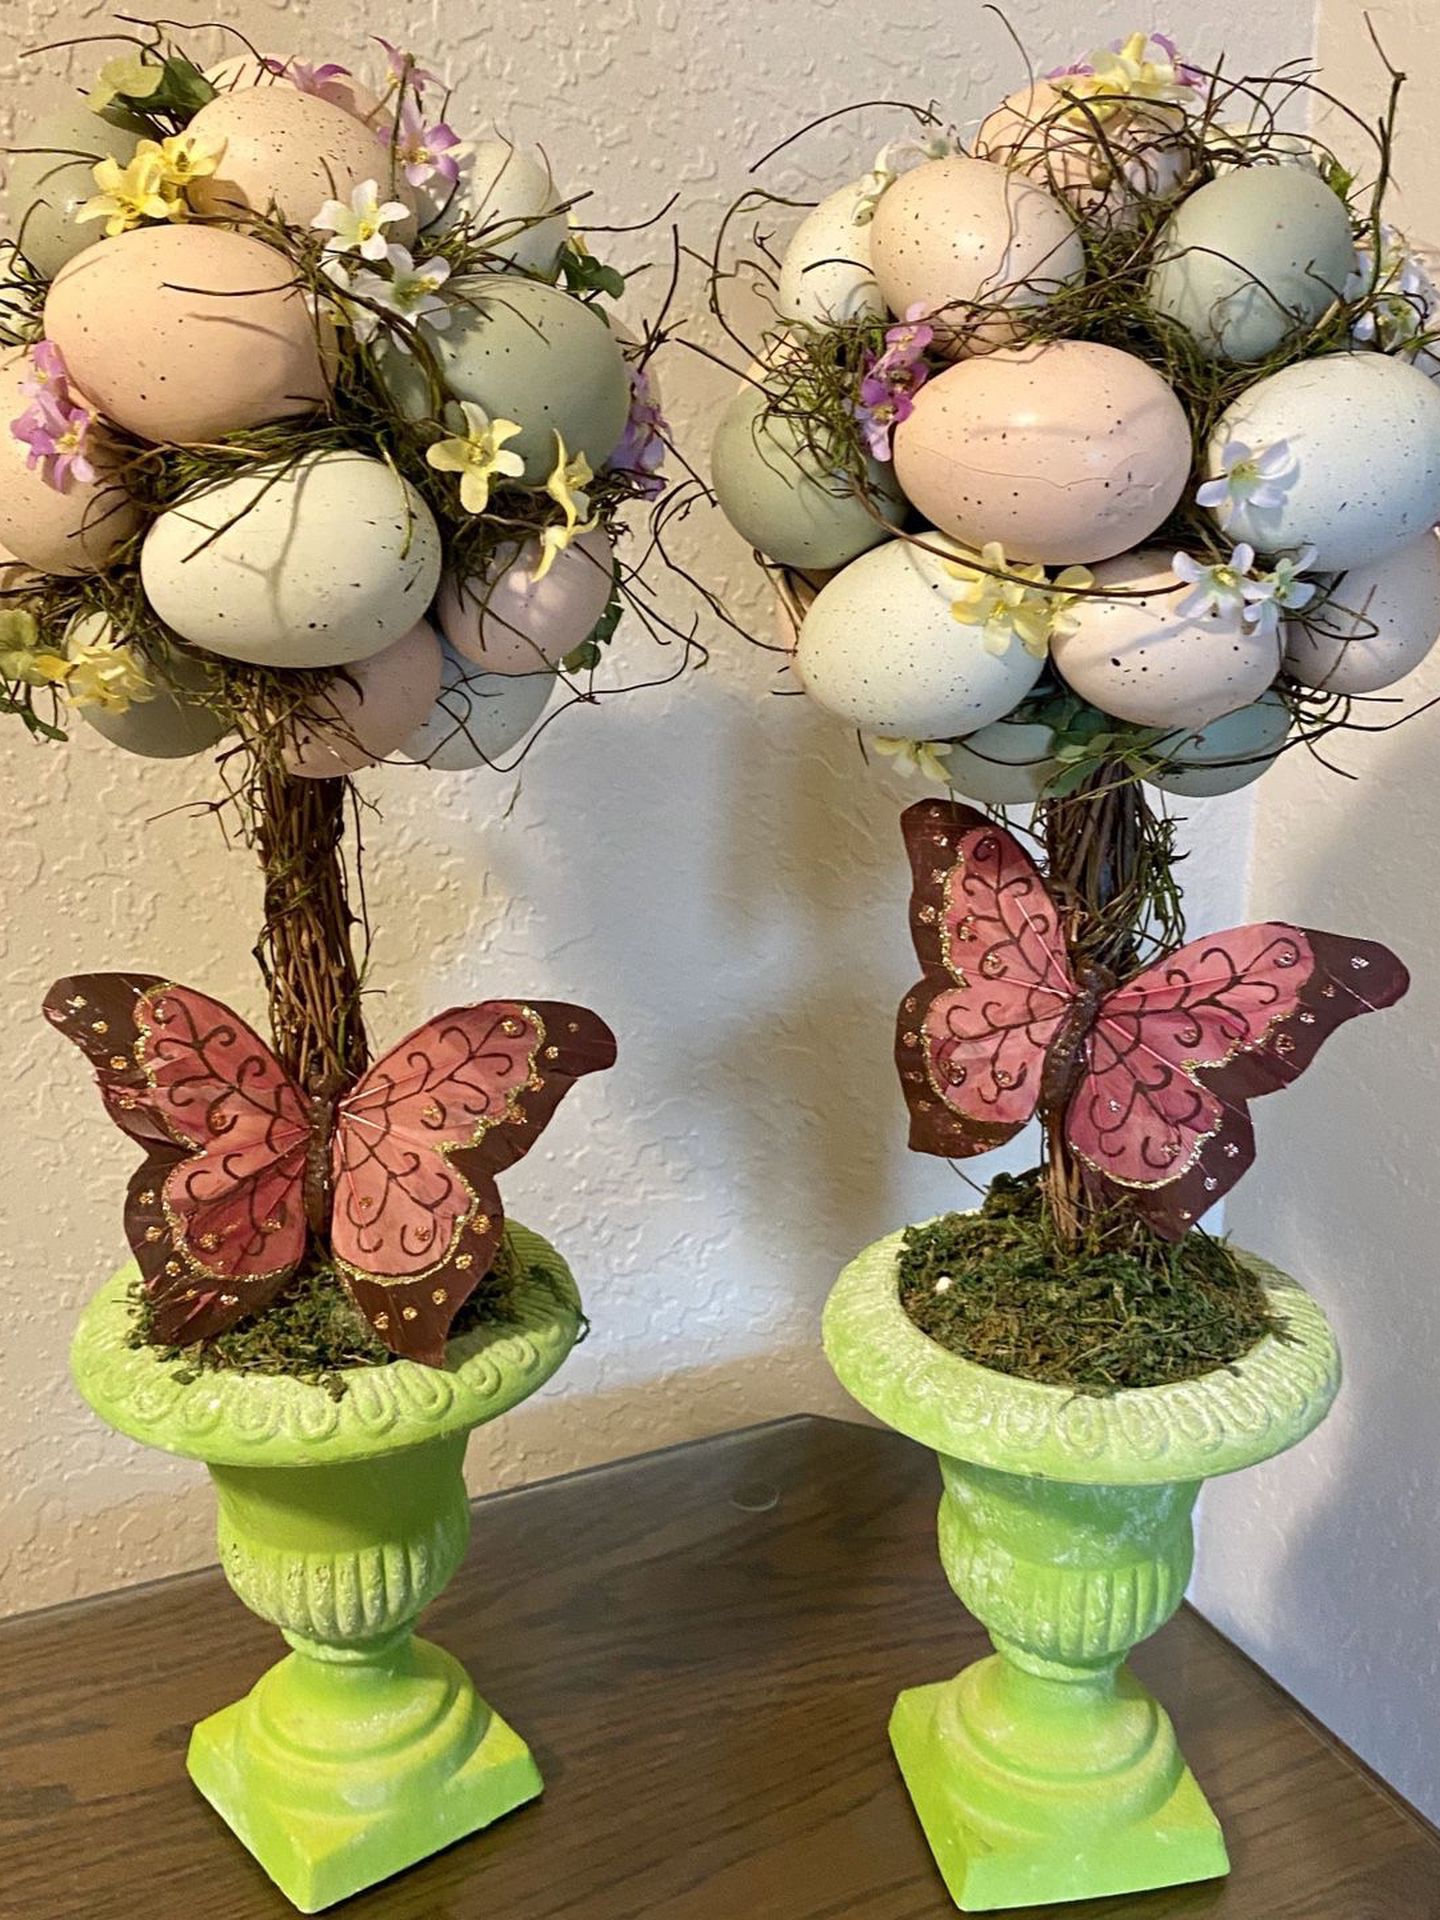 Pair of 20” tall Spring/Easter Egg Topiaries! 🐣 🦋